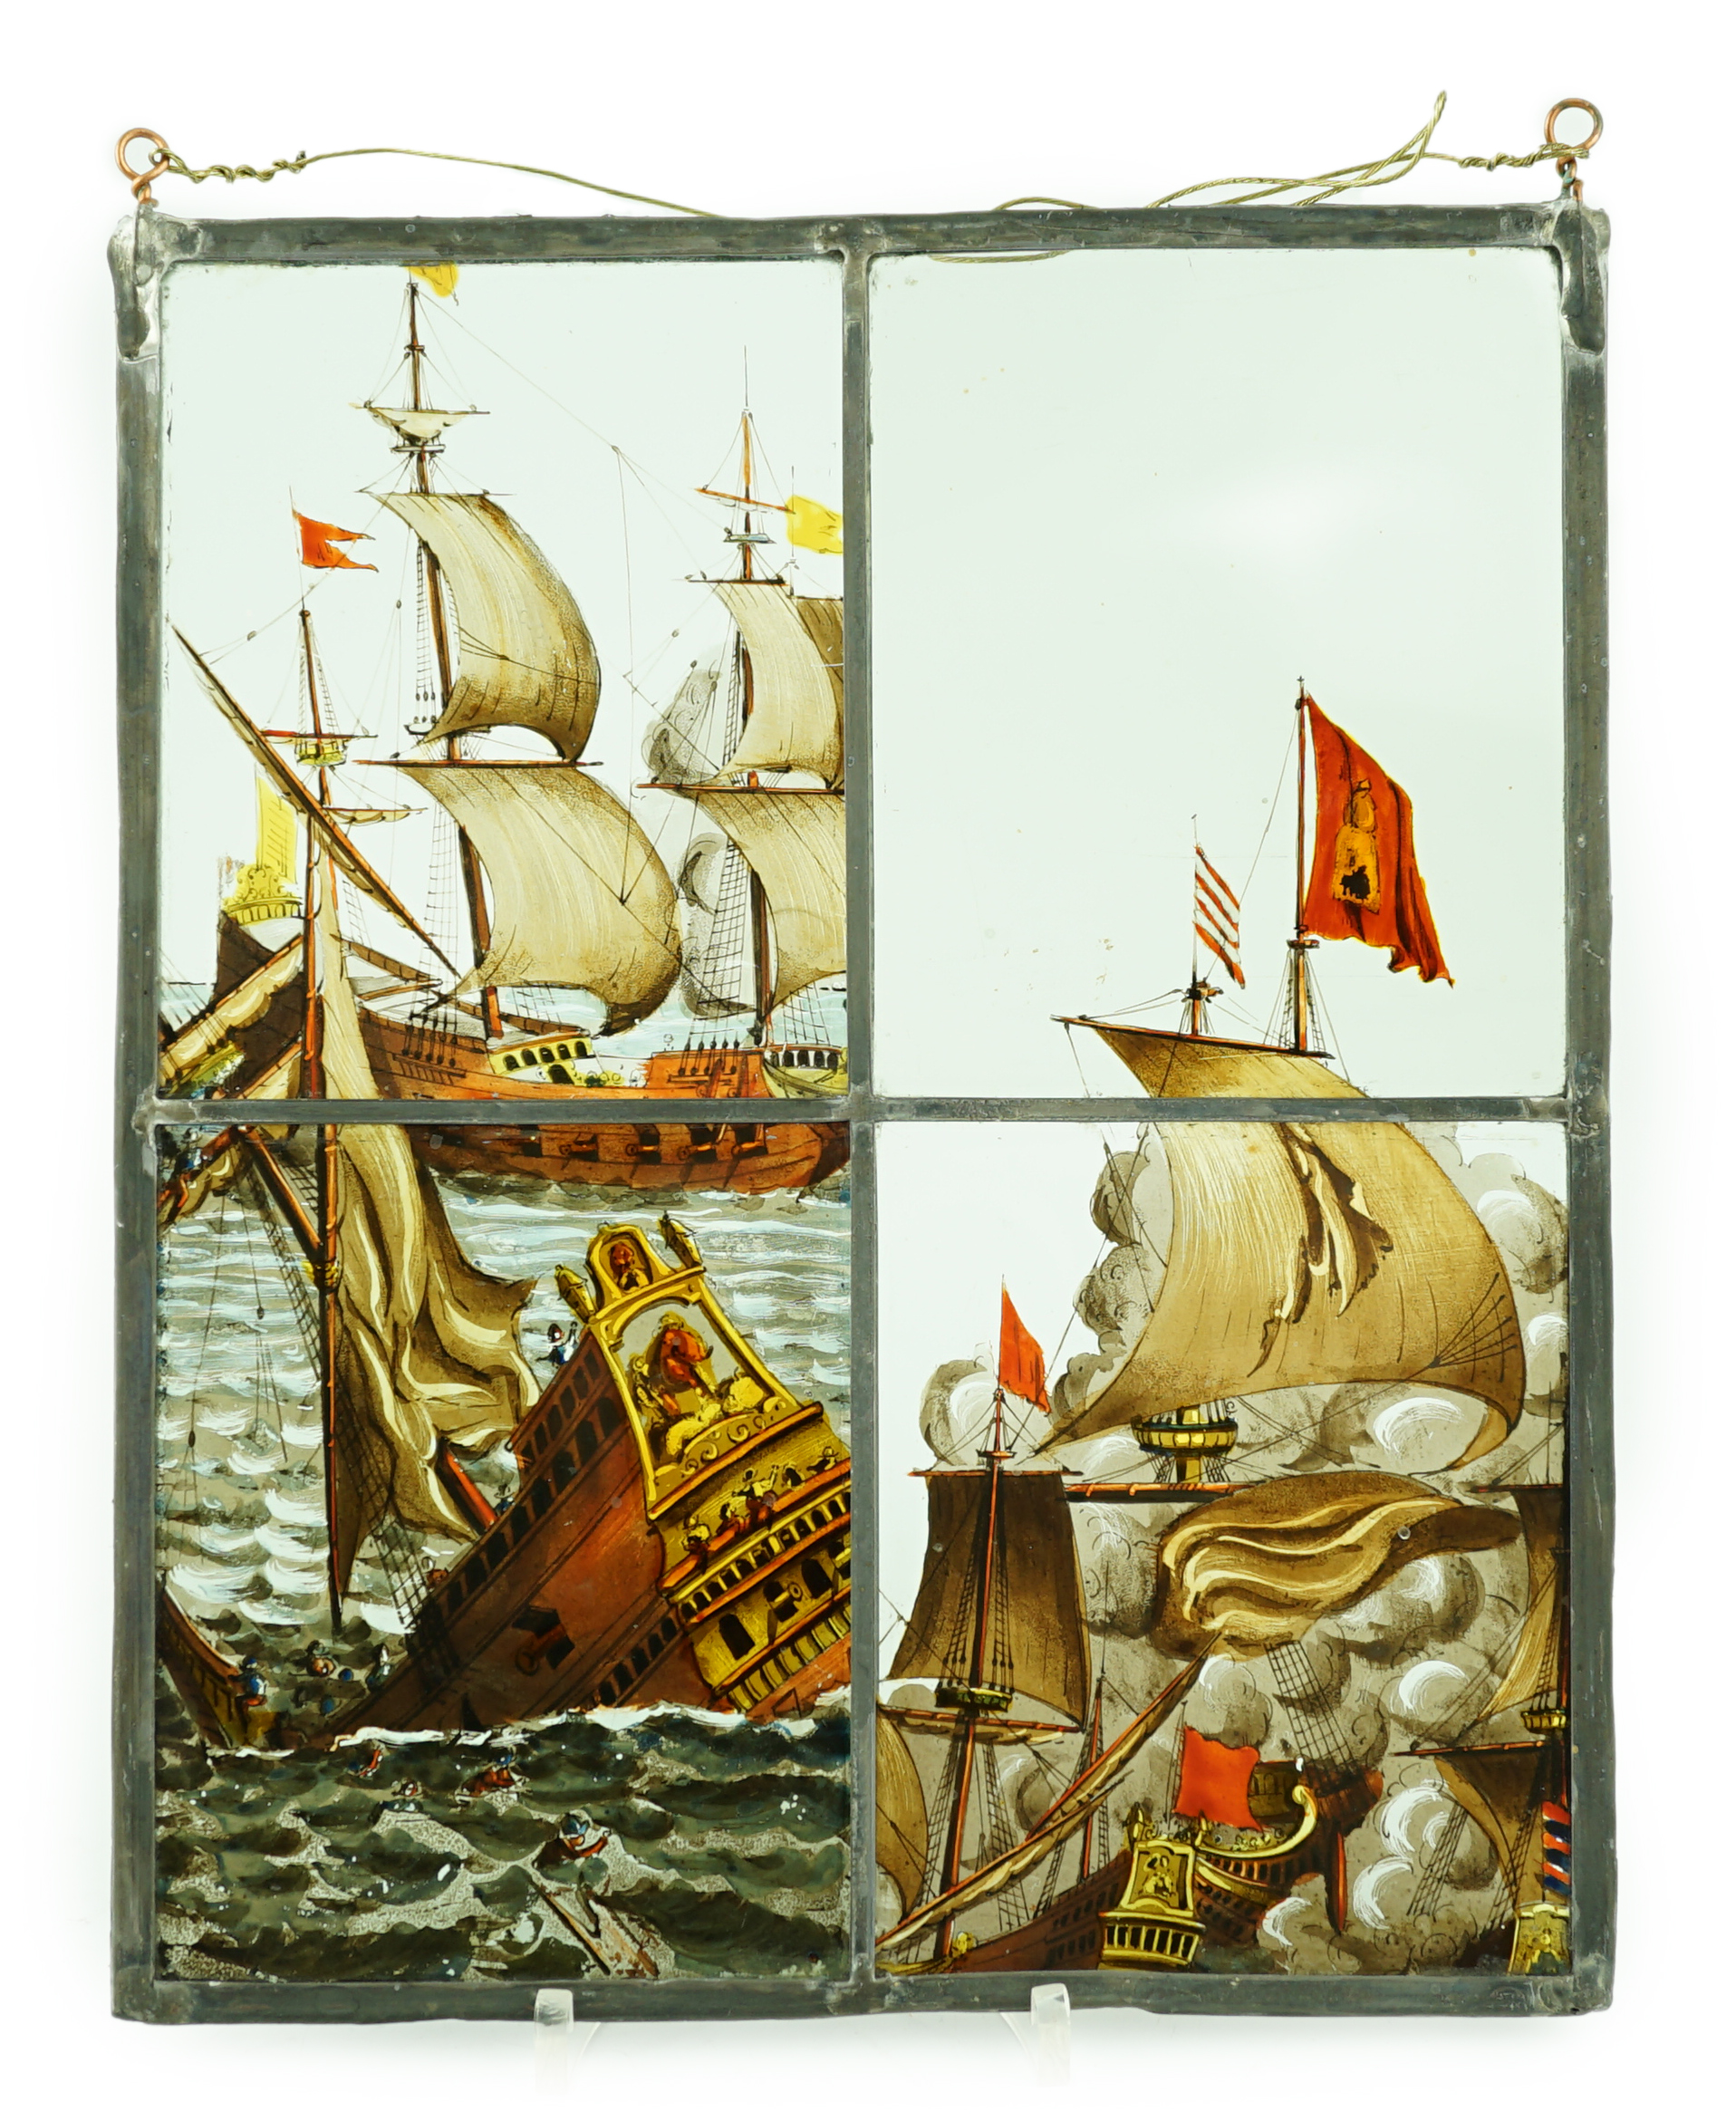 A 18th century Dutch stained glass panel made from four sections depicting a shipwreck and the sails of a fighting galleon, overall 28 x 23cm                                                                               